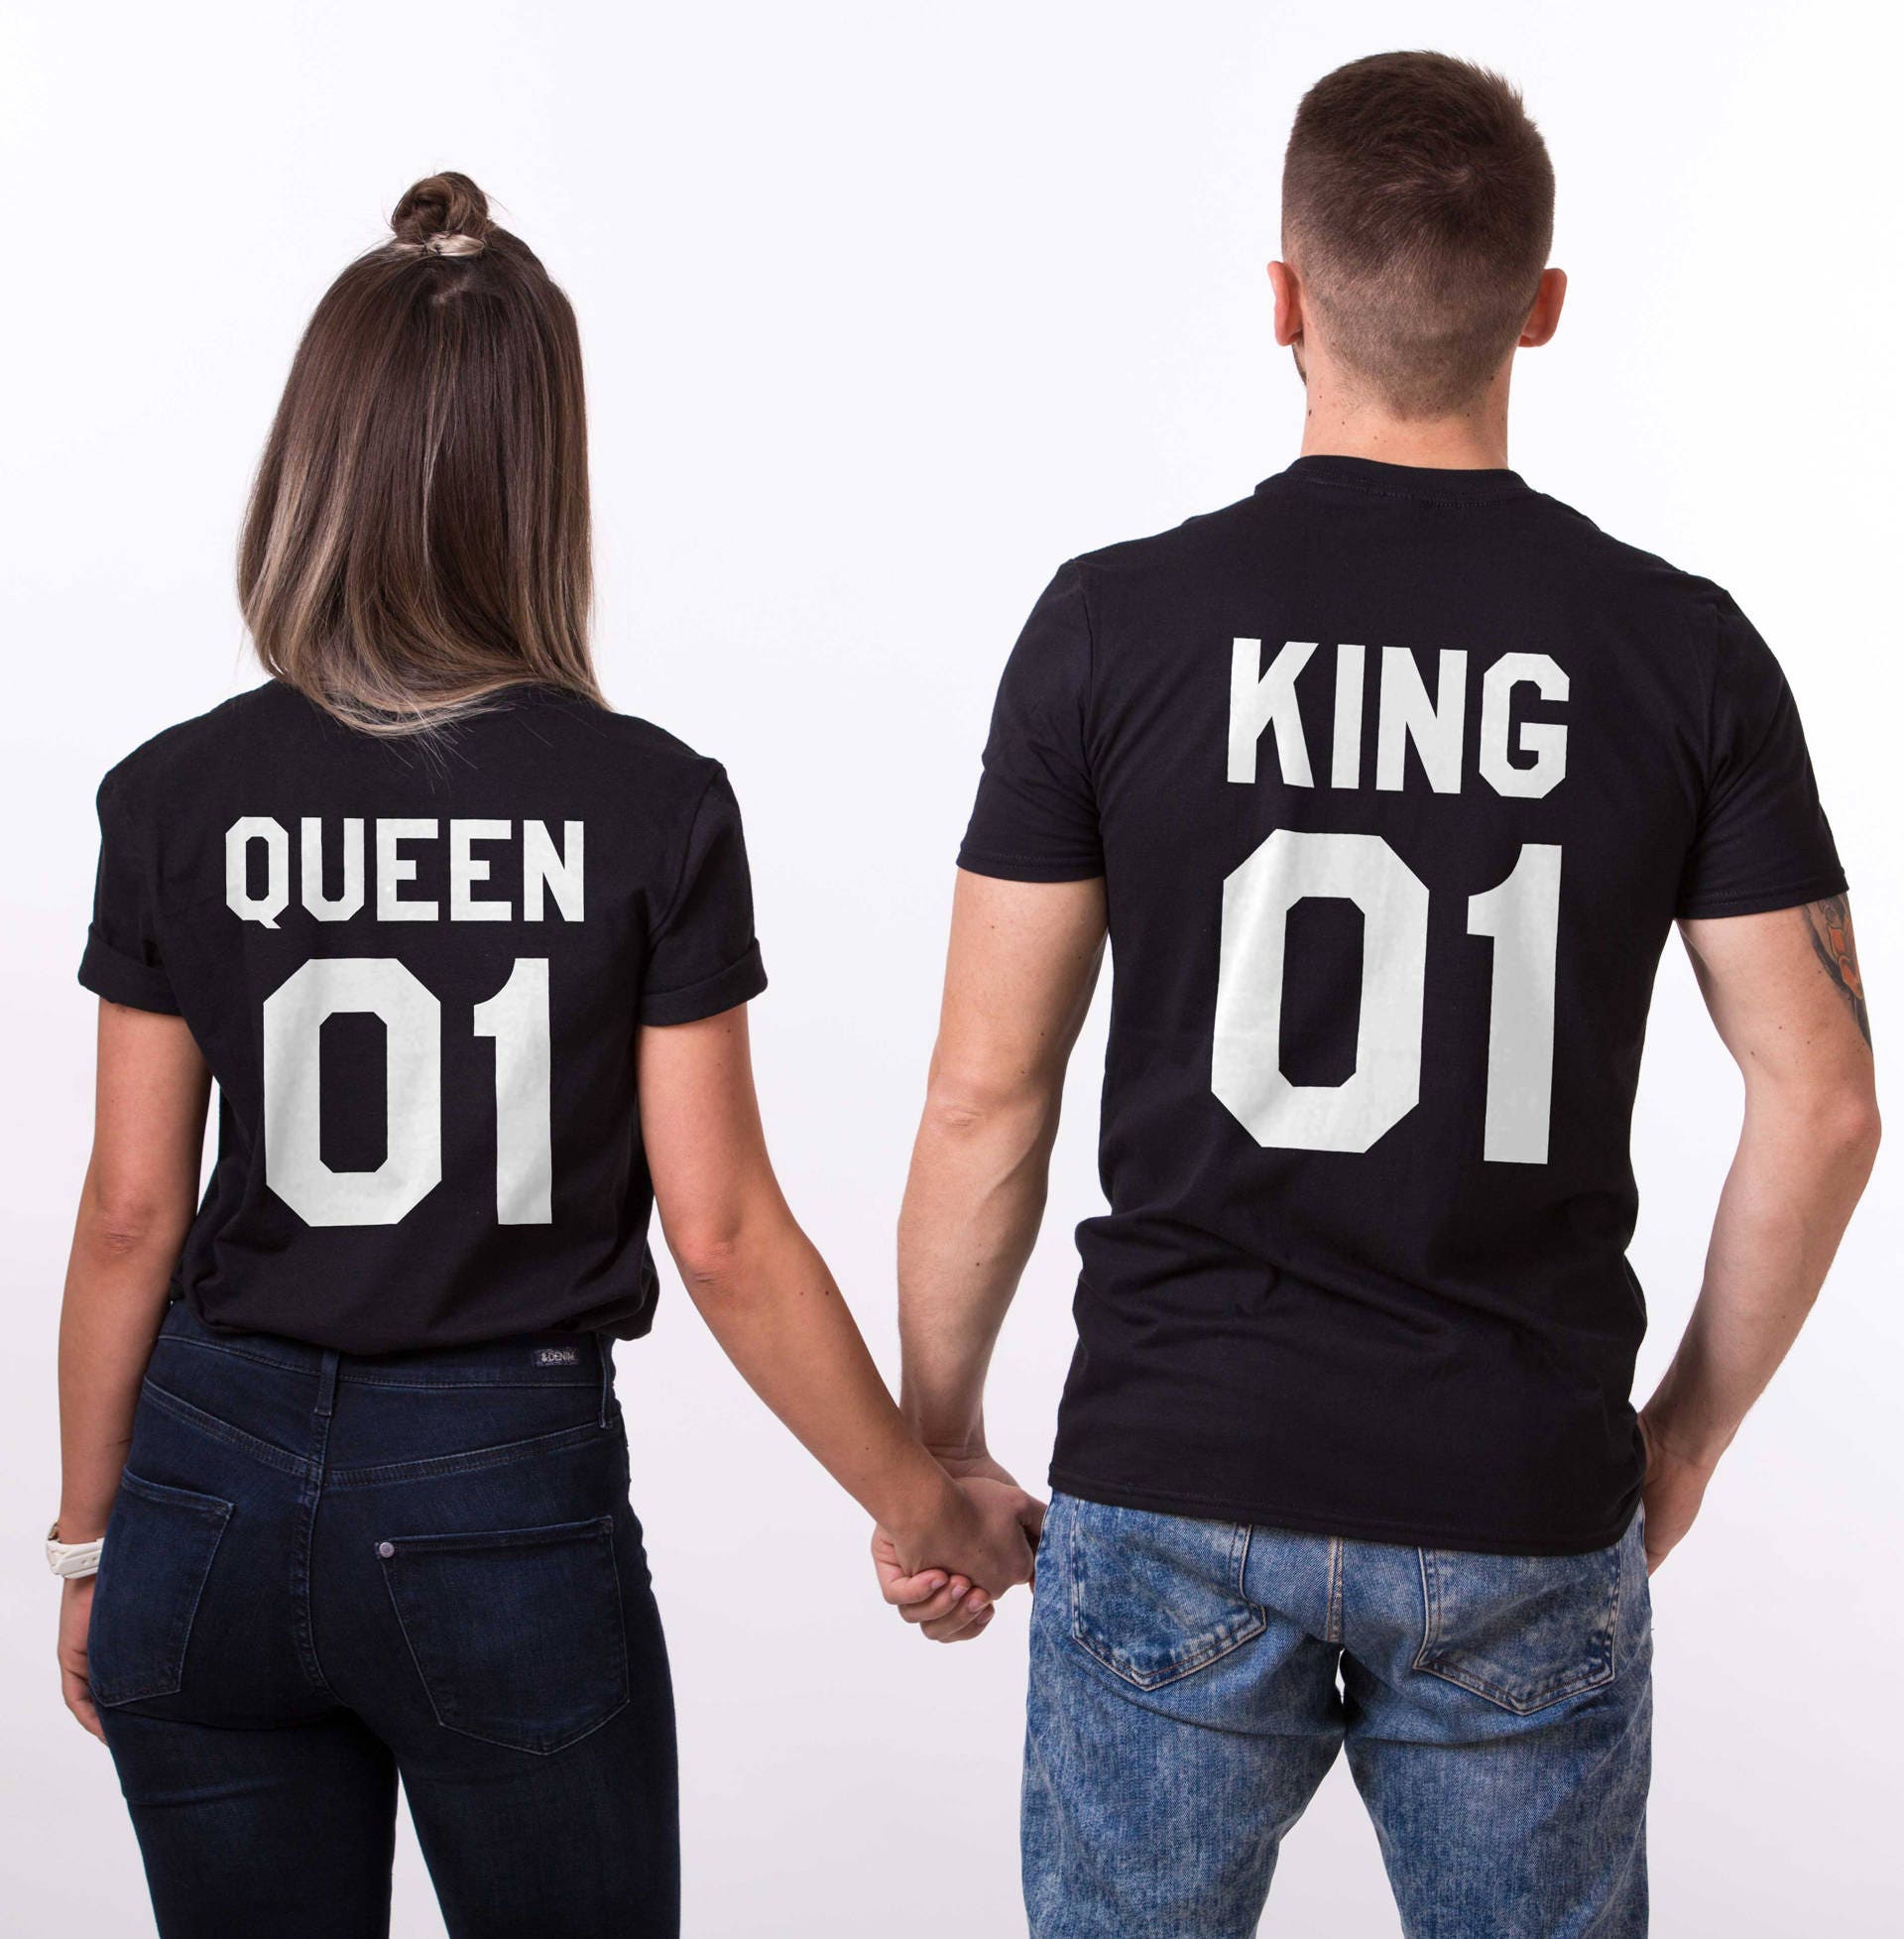 King and Queen Shirts King 01 Queen 01 Couples T-shirt King - Etsy